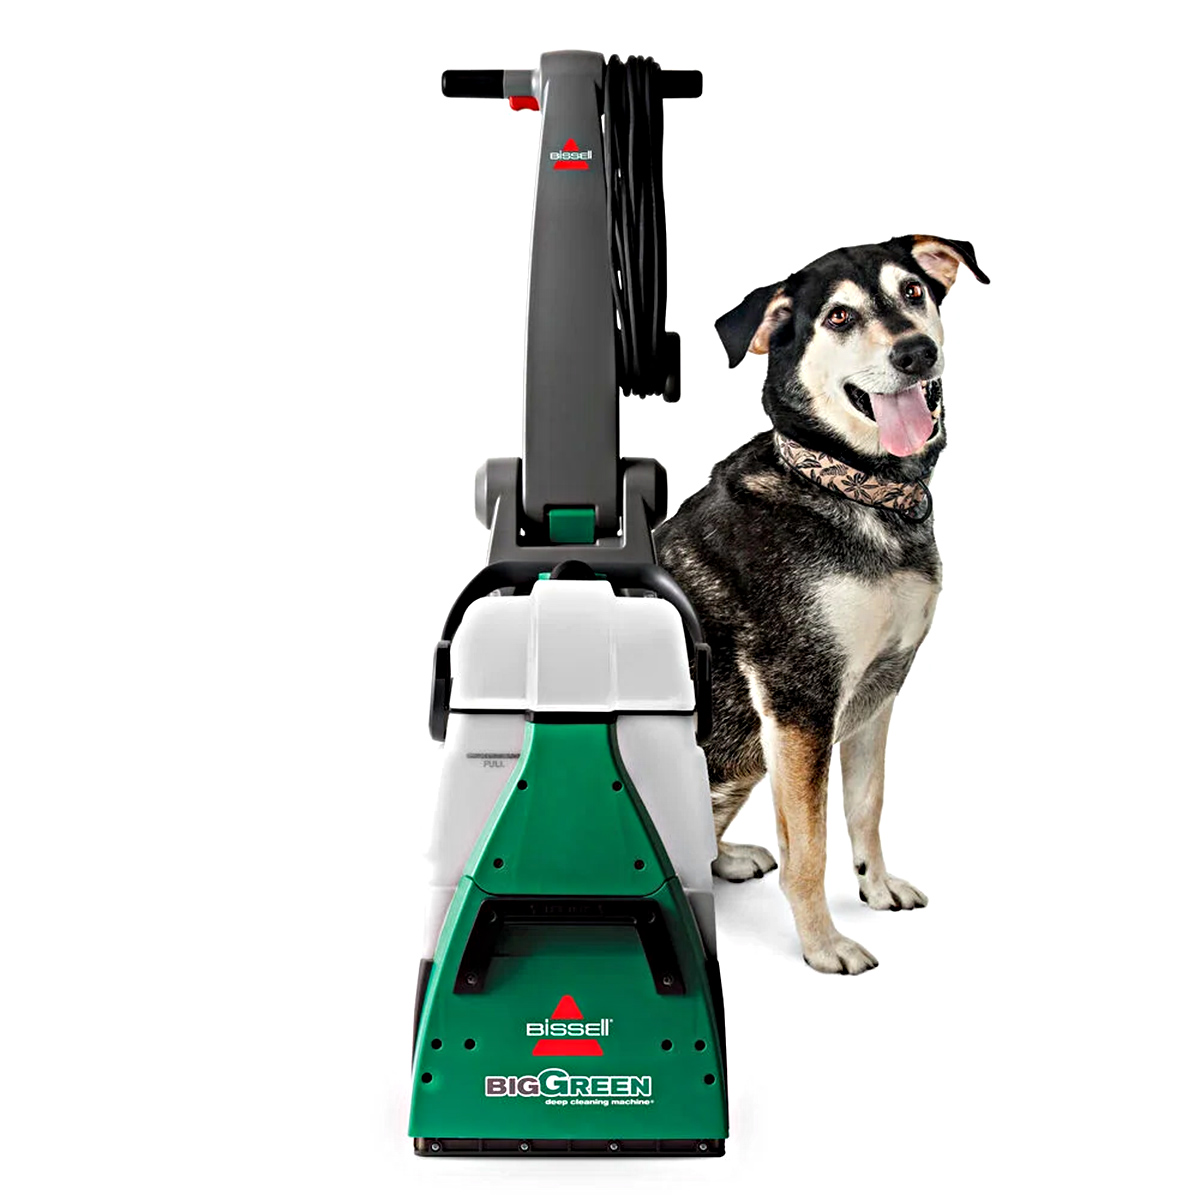 How To Use A Bissell Big Green Carpet Cleaner